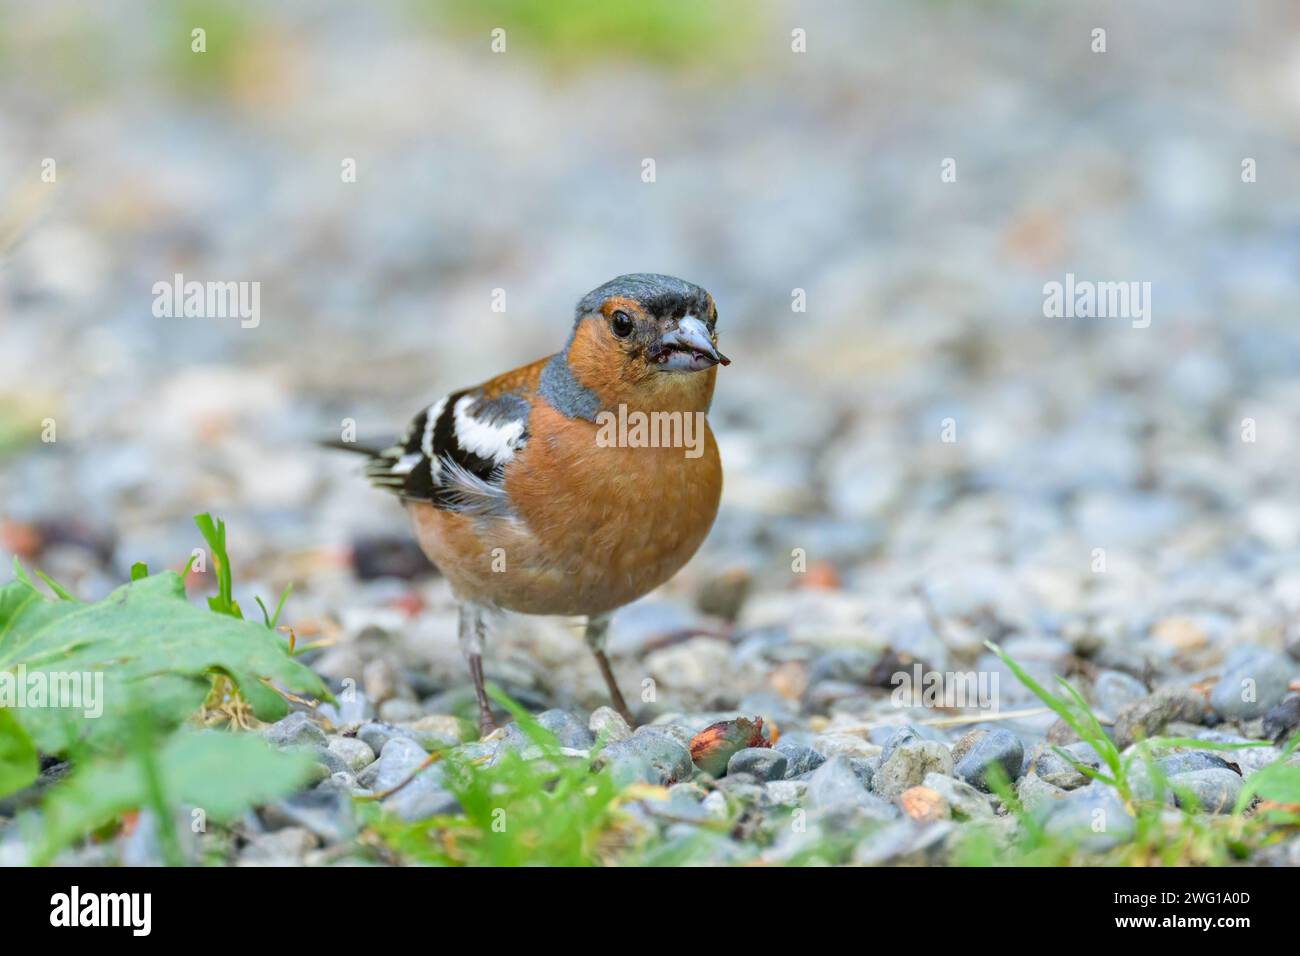 A male Common Chaffinch standing on the ground, sunny day in summer Prad am Stilfserjoch Italy Stock Photo